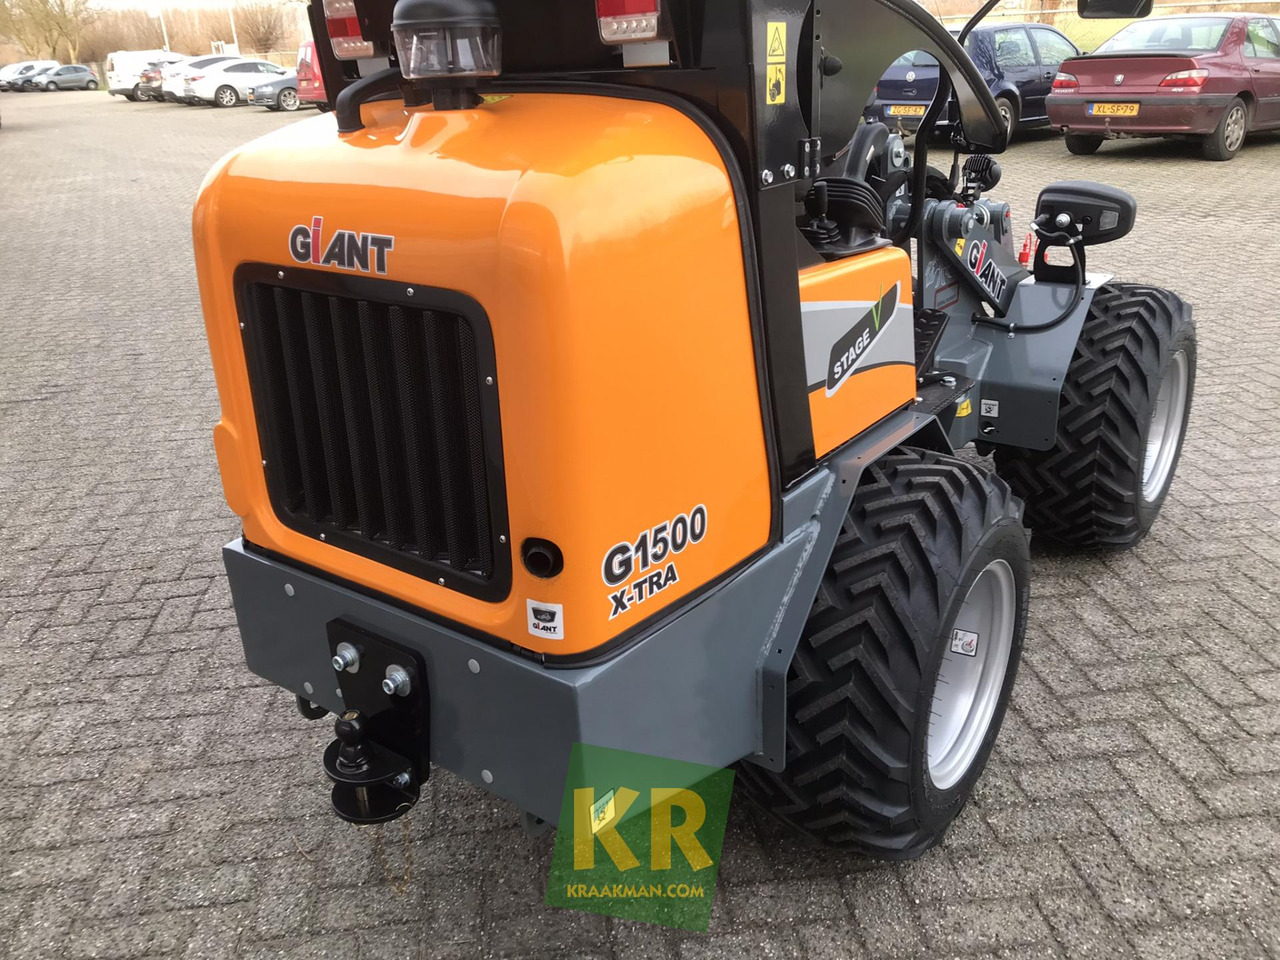 Compact loader G1500 X-tra Giant